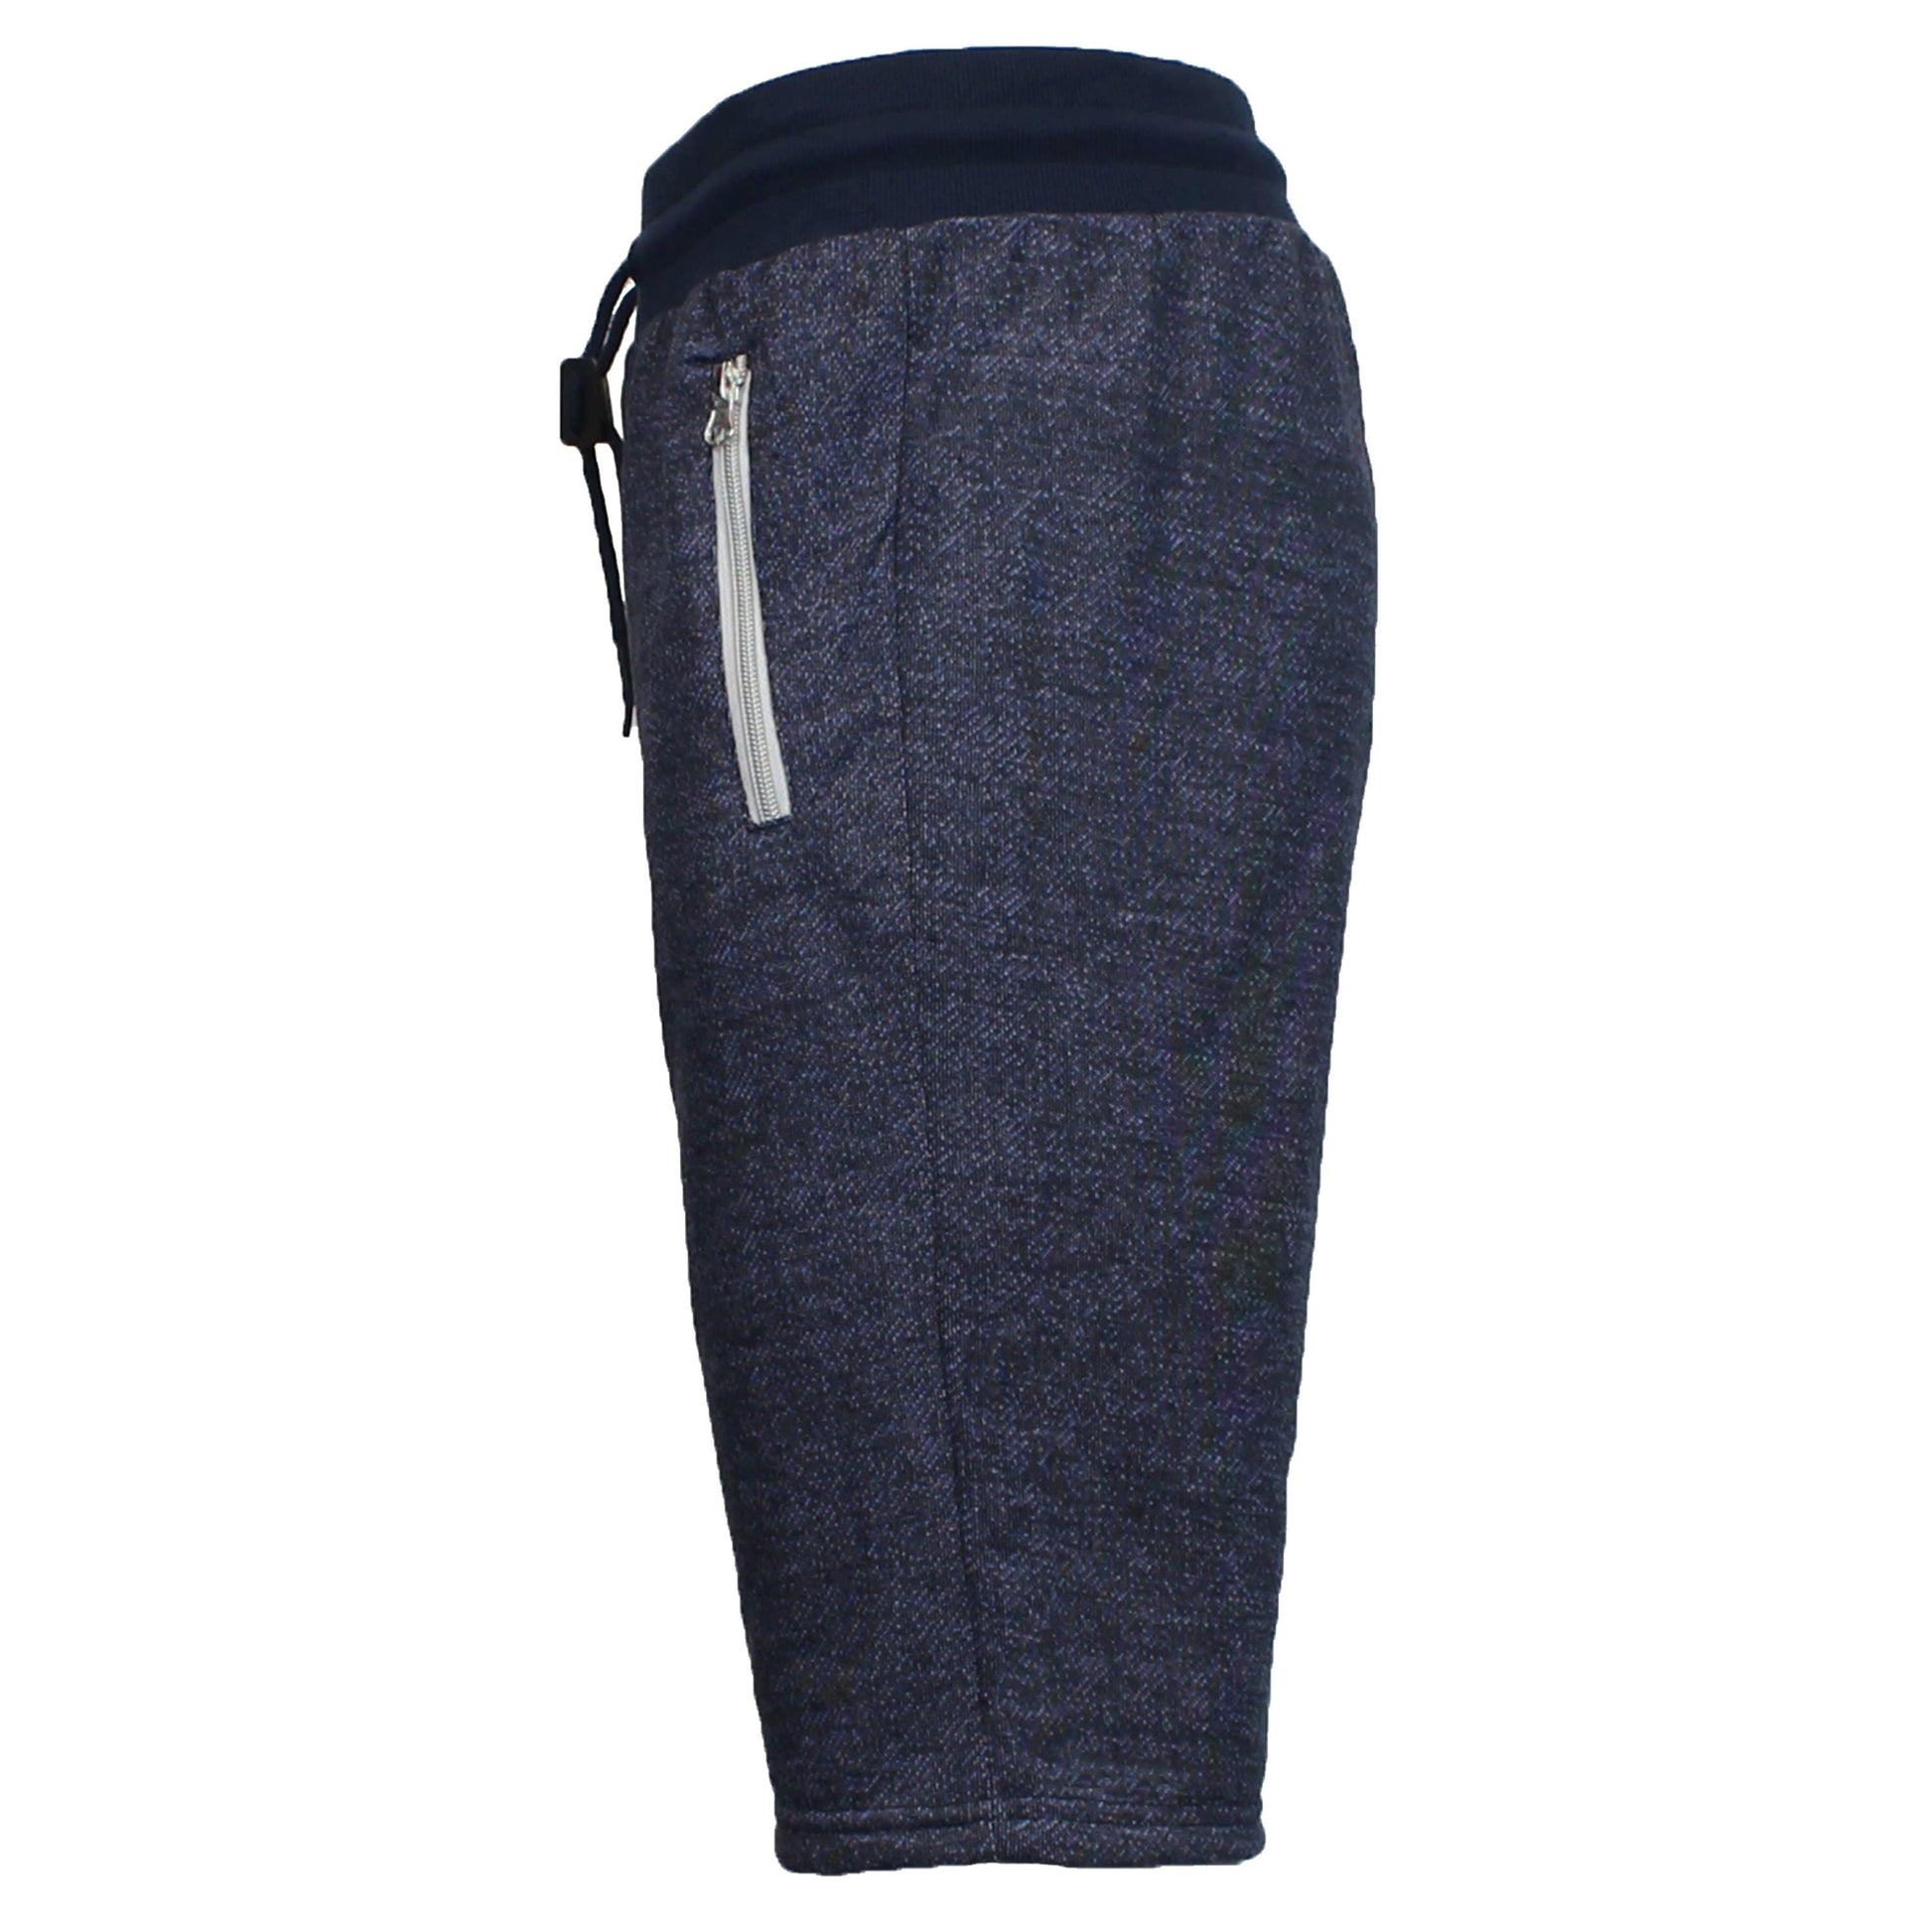 Men's Marled or Solid French Terry Shorts with Zipper Pockets - GalaxybyHarvic